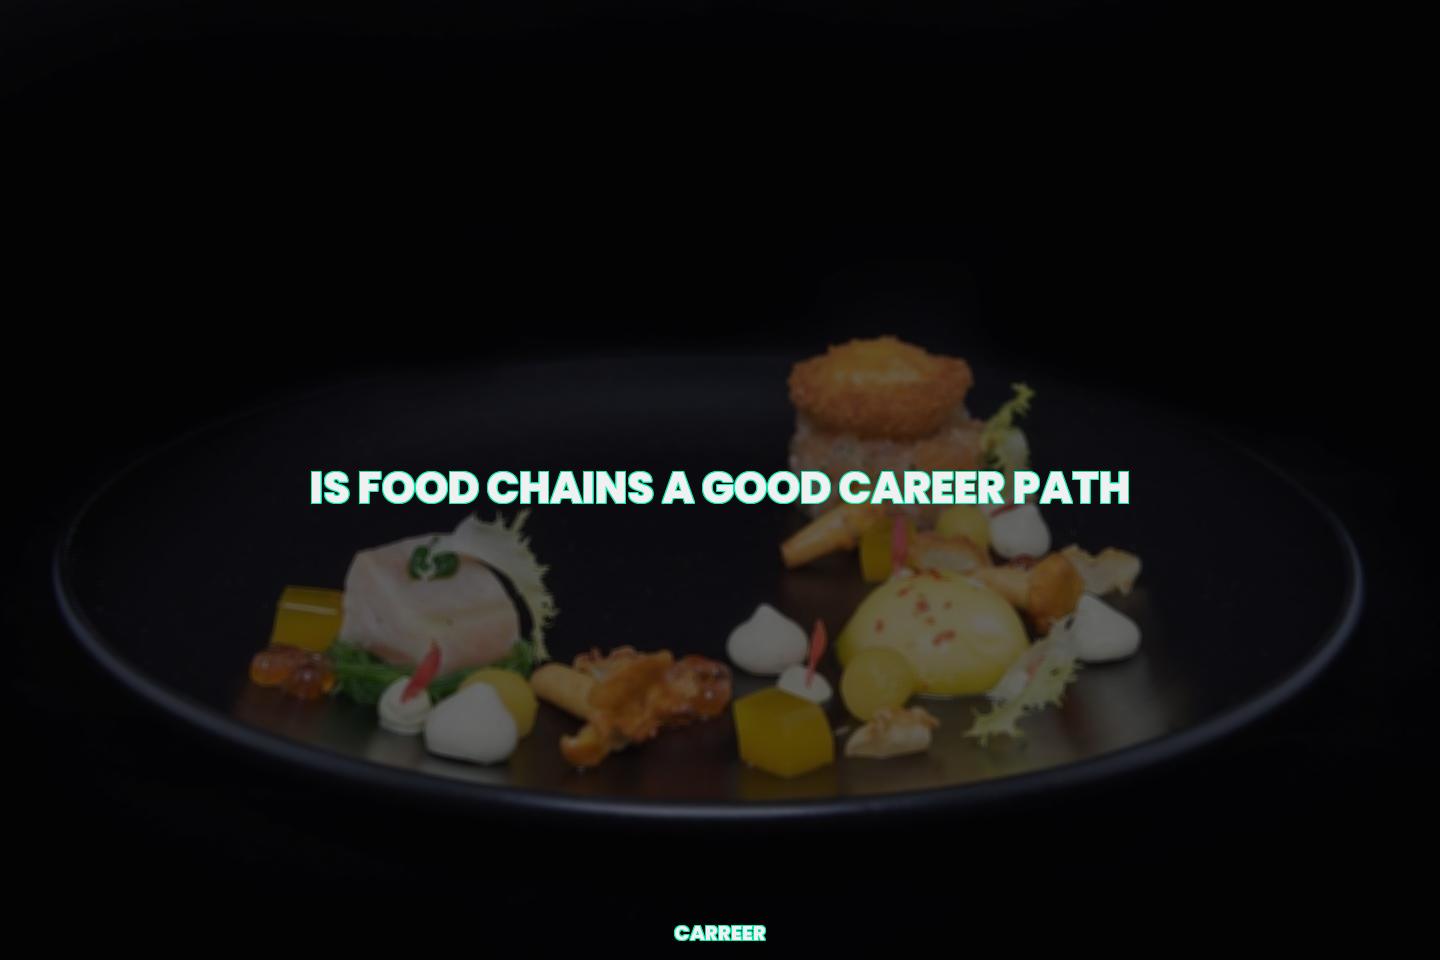 Is food chains a good career path